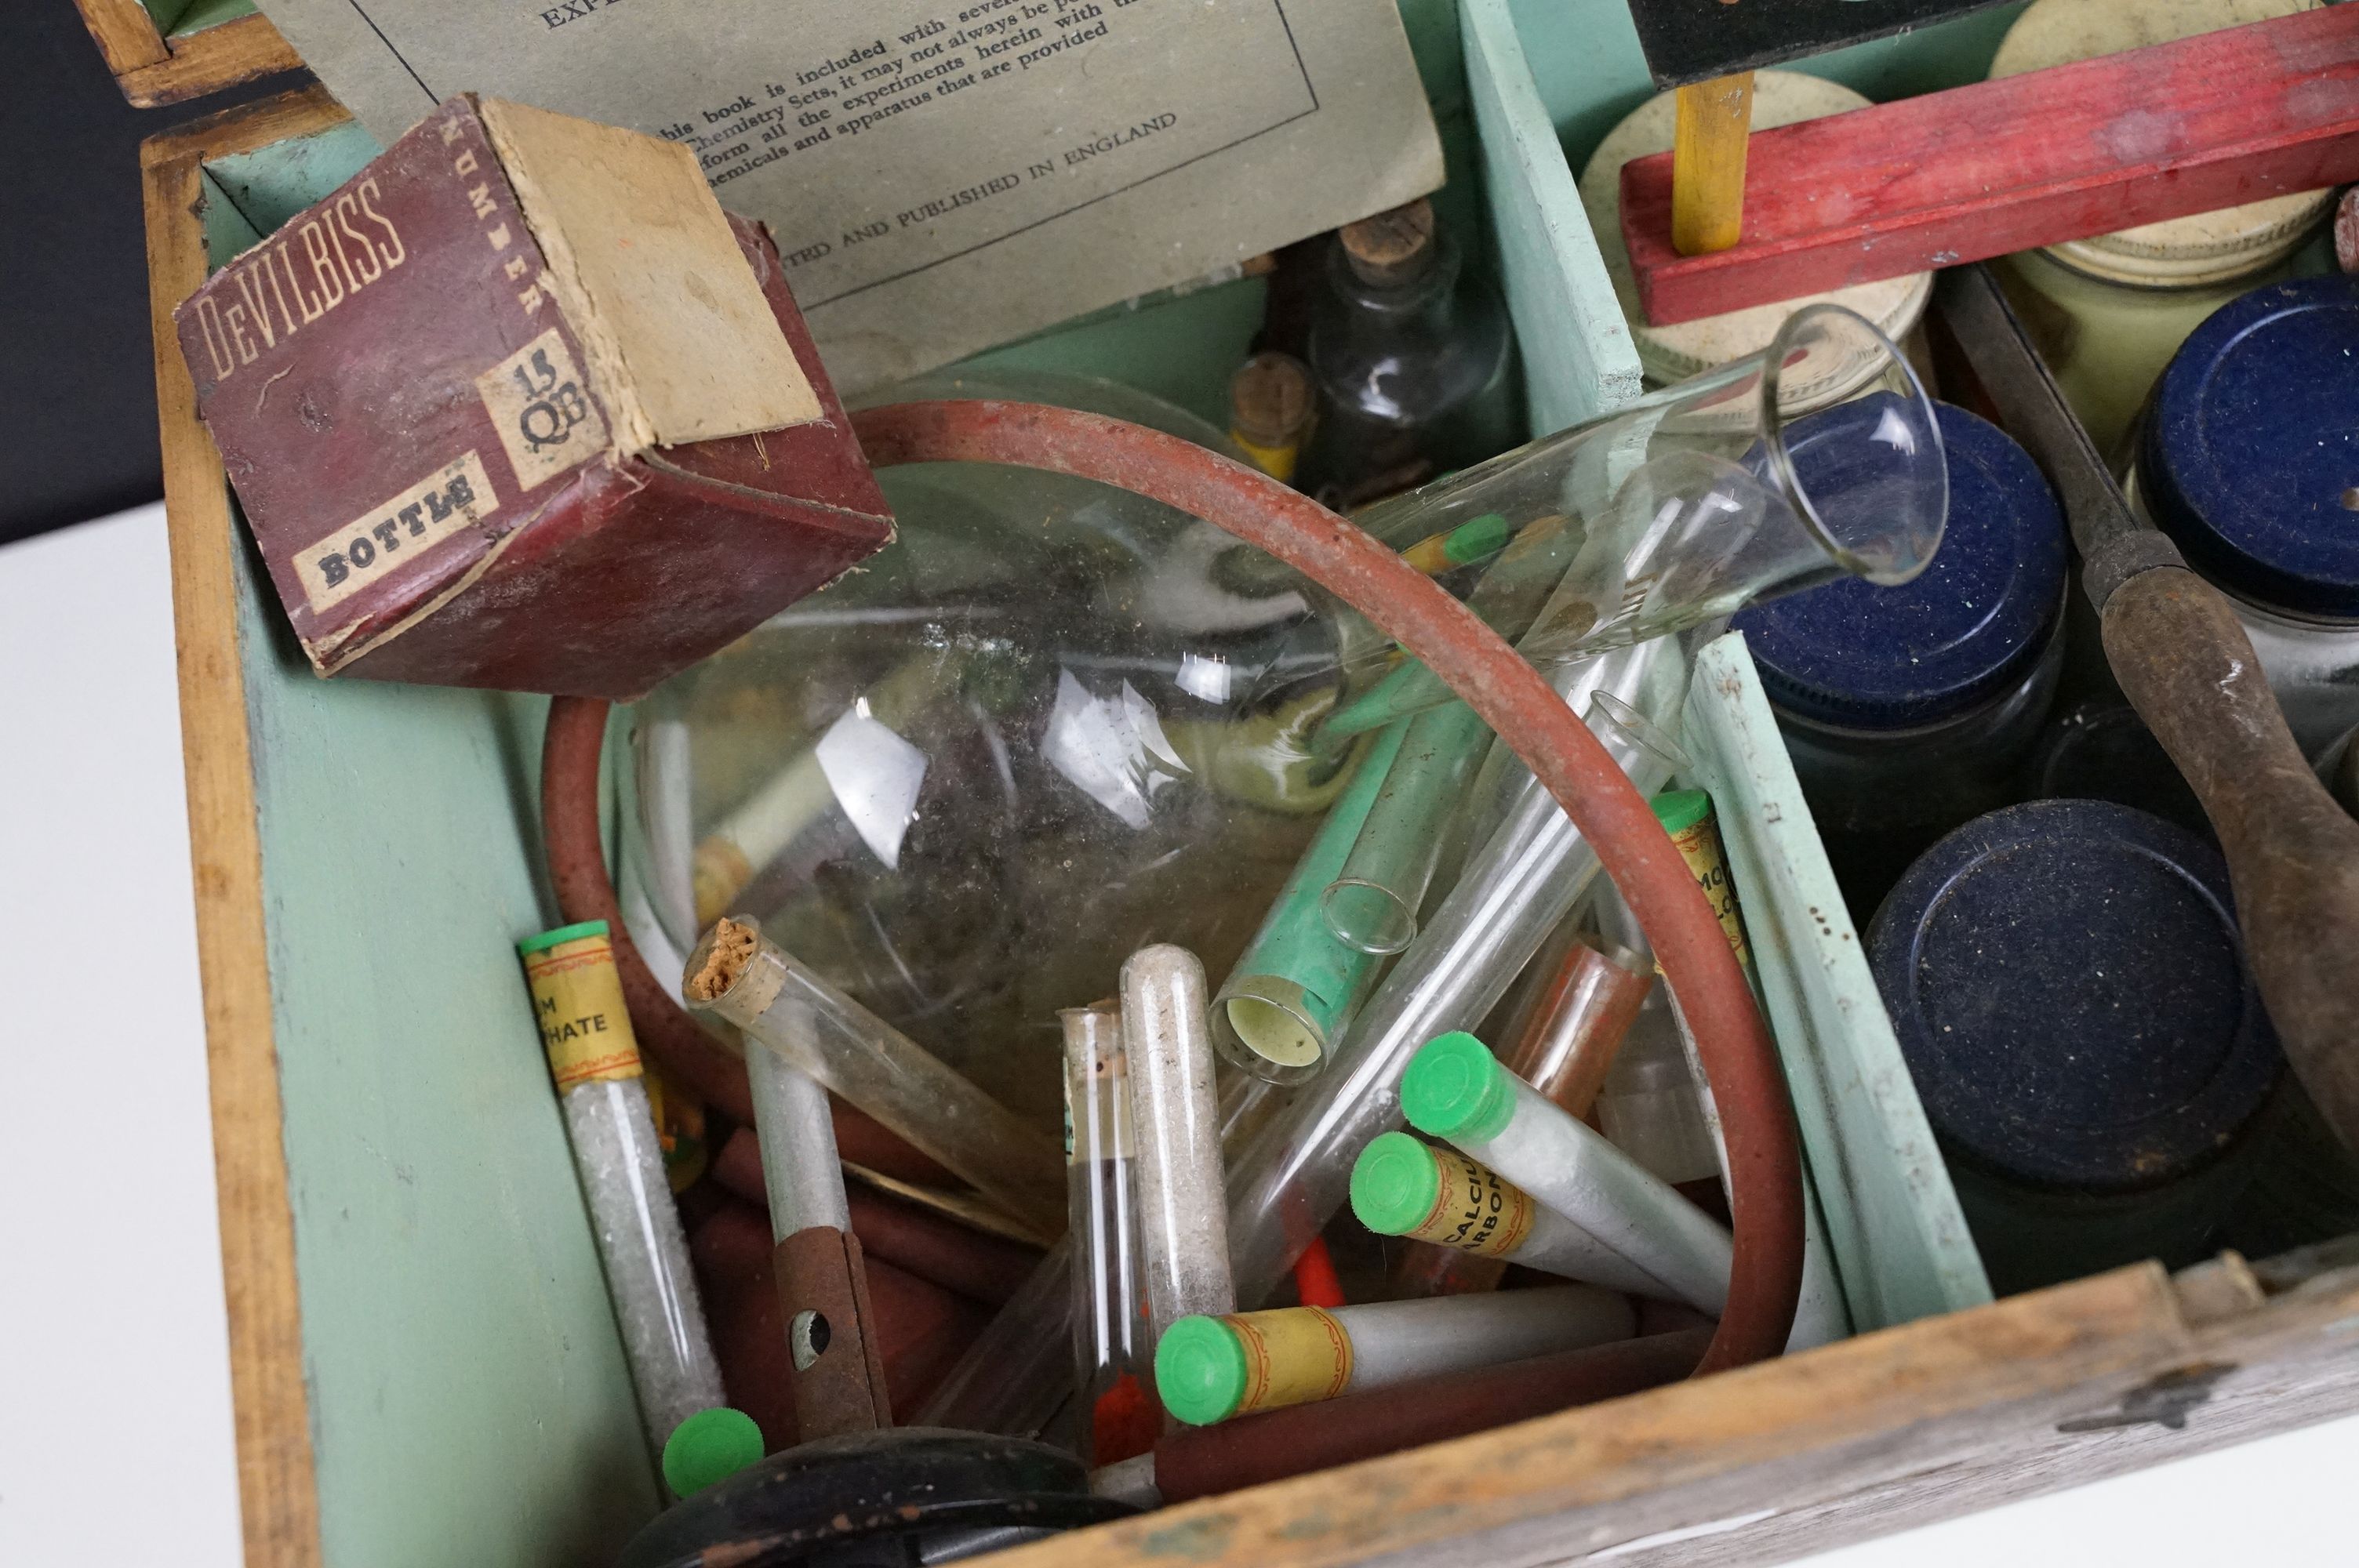 Mid 20th Century chemistry set containing assorted chemical specimens, test tubes, test tube racks - Image 3 of 6